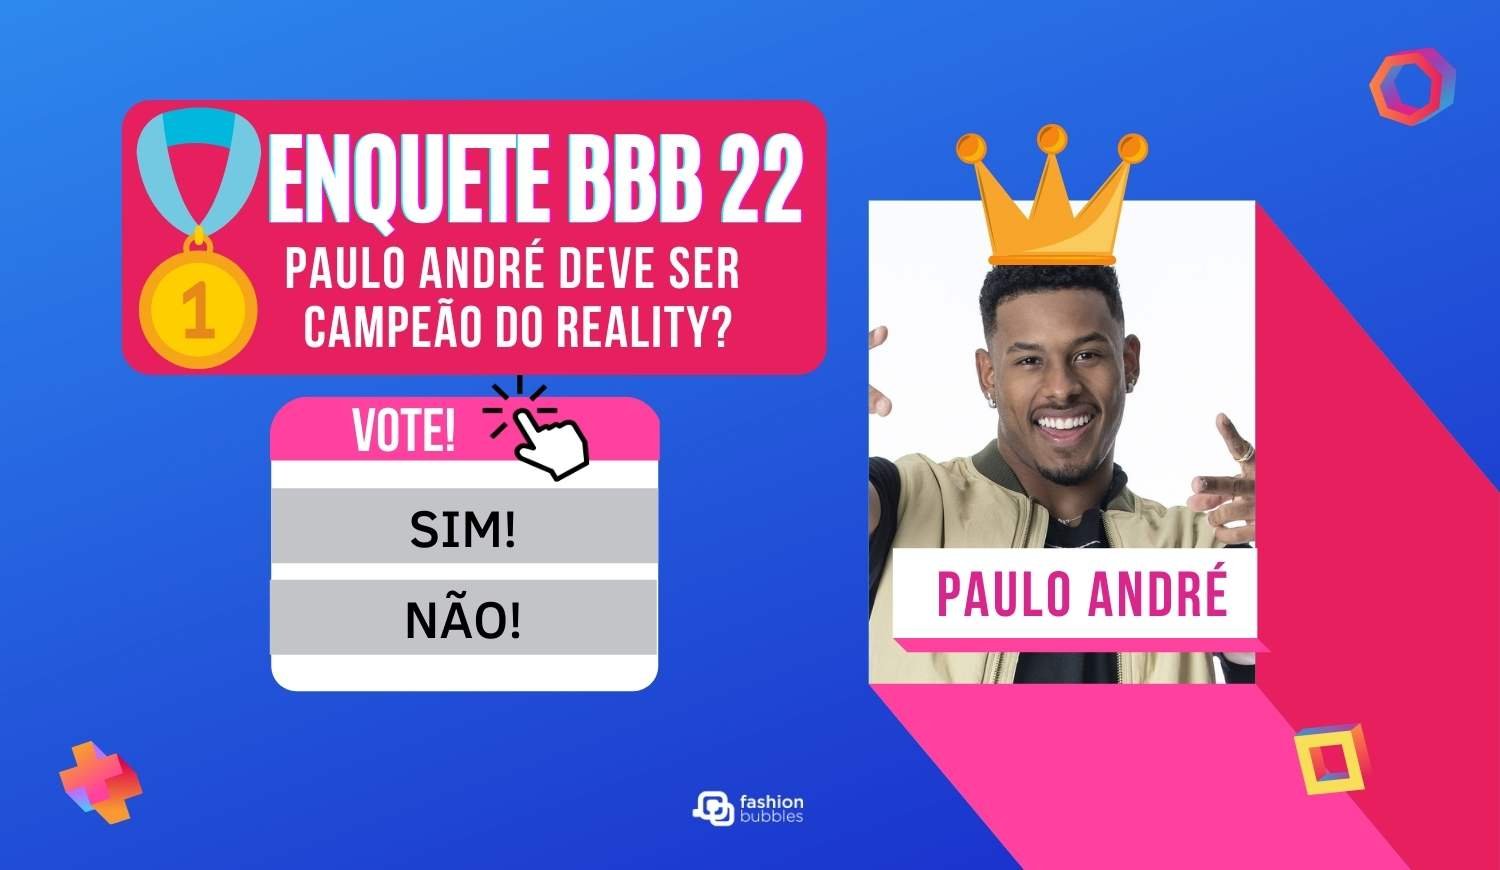 Enquete Final BBB 22: Paulo André deve ganhar o reality?